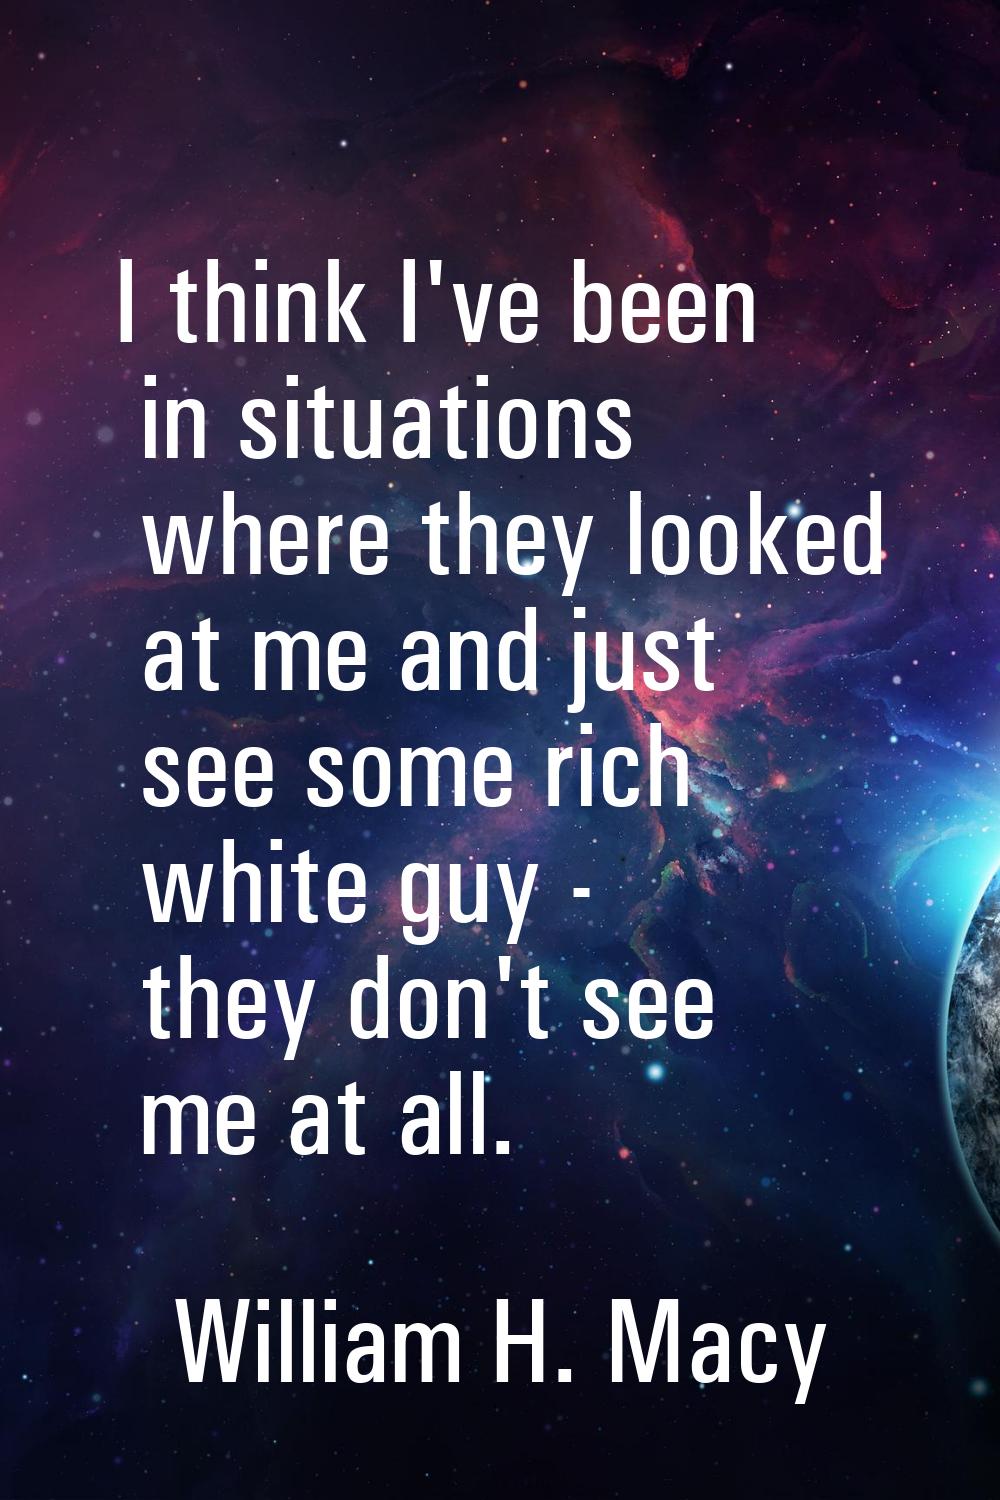 I think I've been in situations where they looked at me and just see some rich white guy - they don